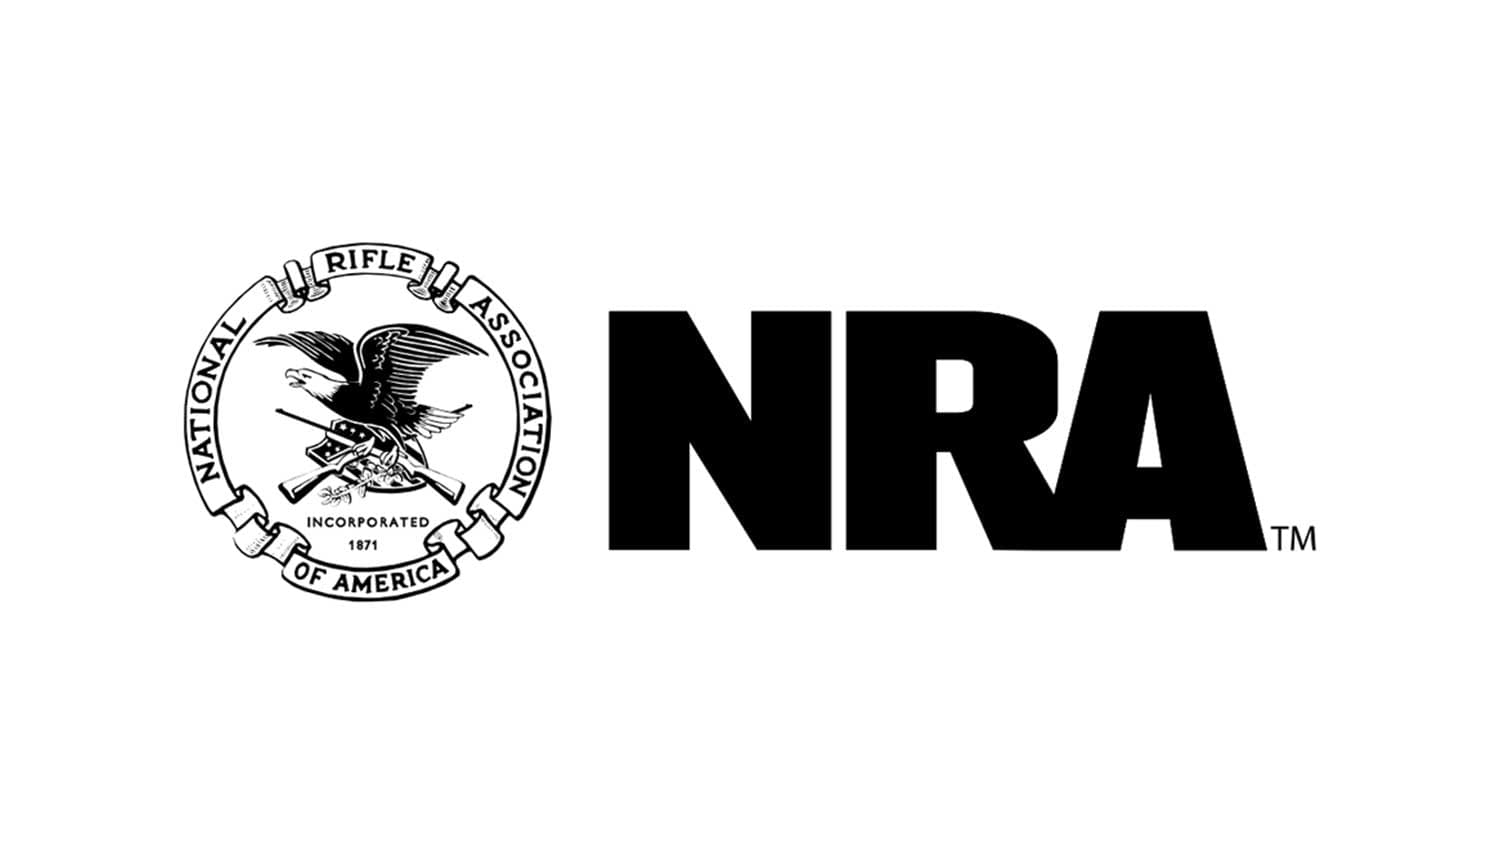 Attend a Friends of NRA Event